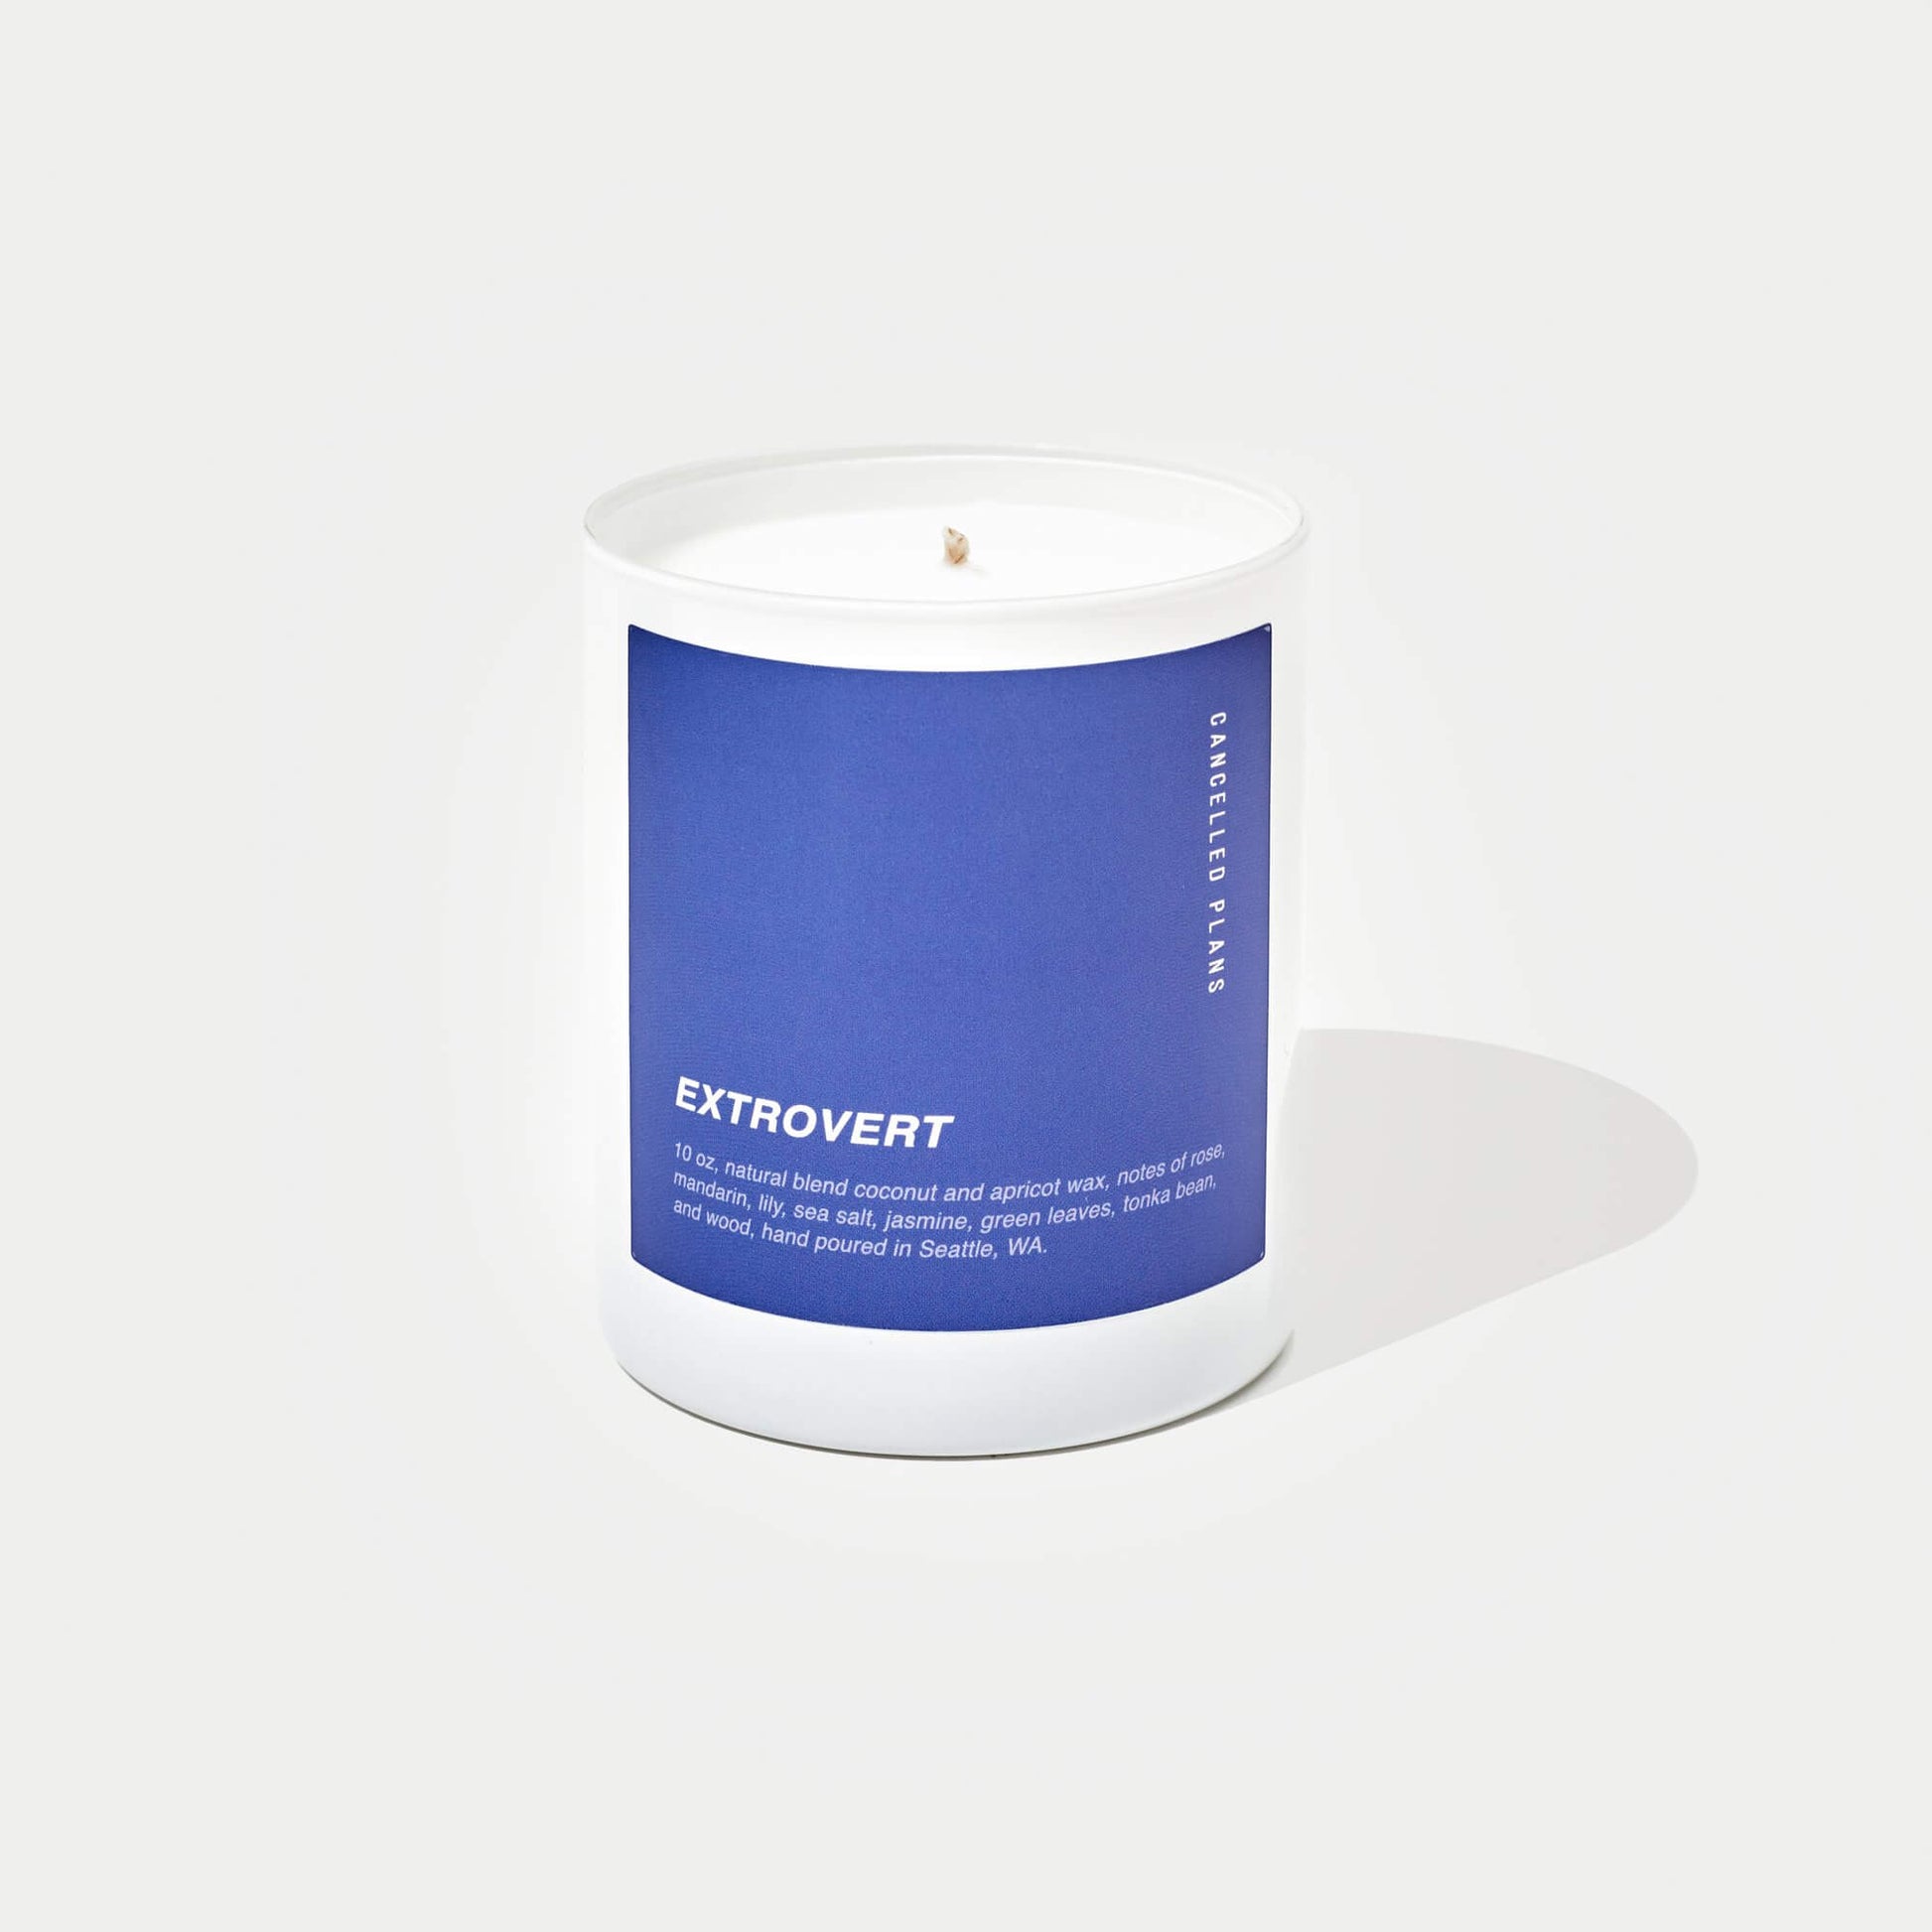 Cancelled Plans Extrovert Scented Candle - Osmology Scented Candles & Home Fragrance